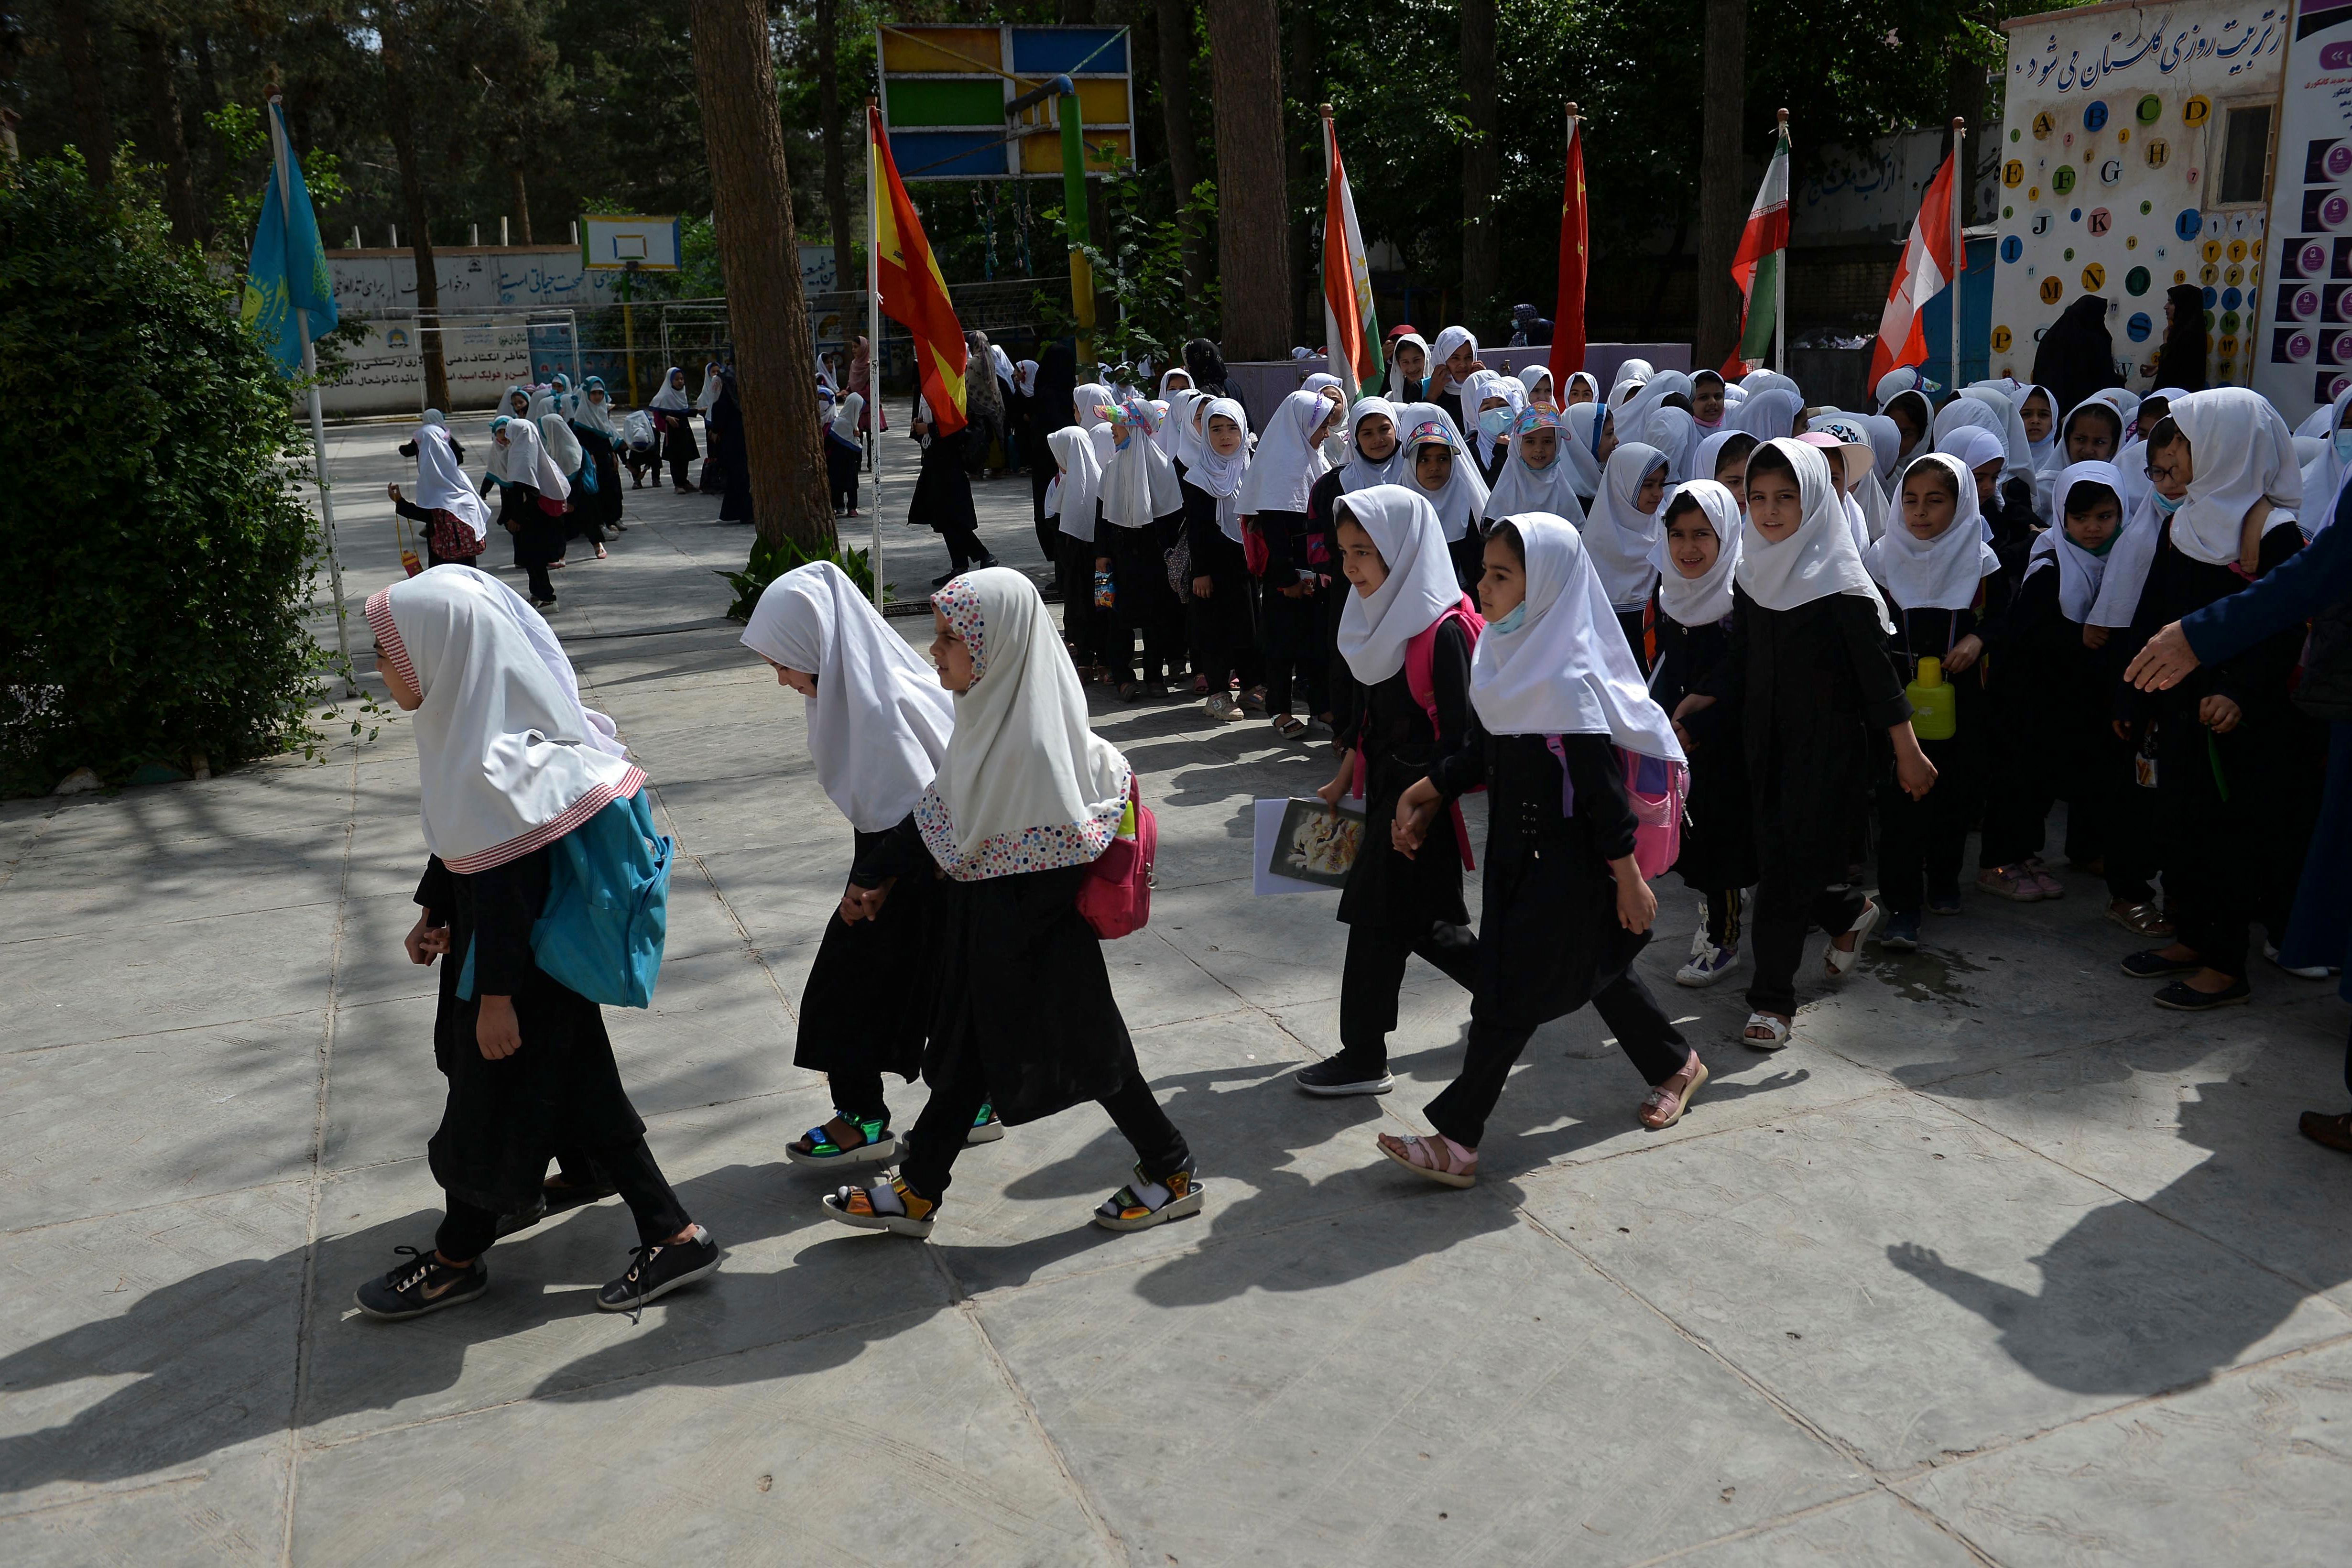 A generation of Afghan girls has been educated since the 9/11 attacks